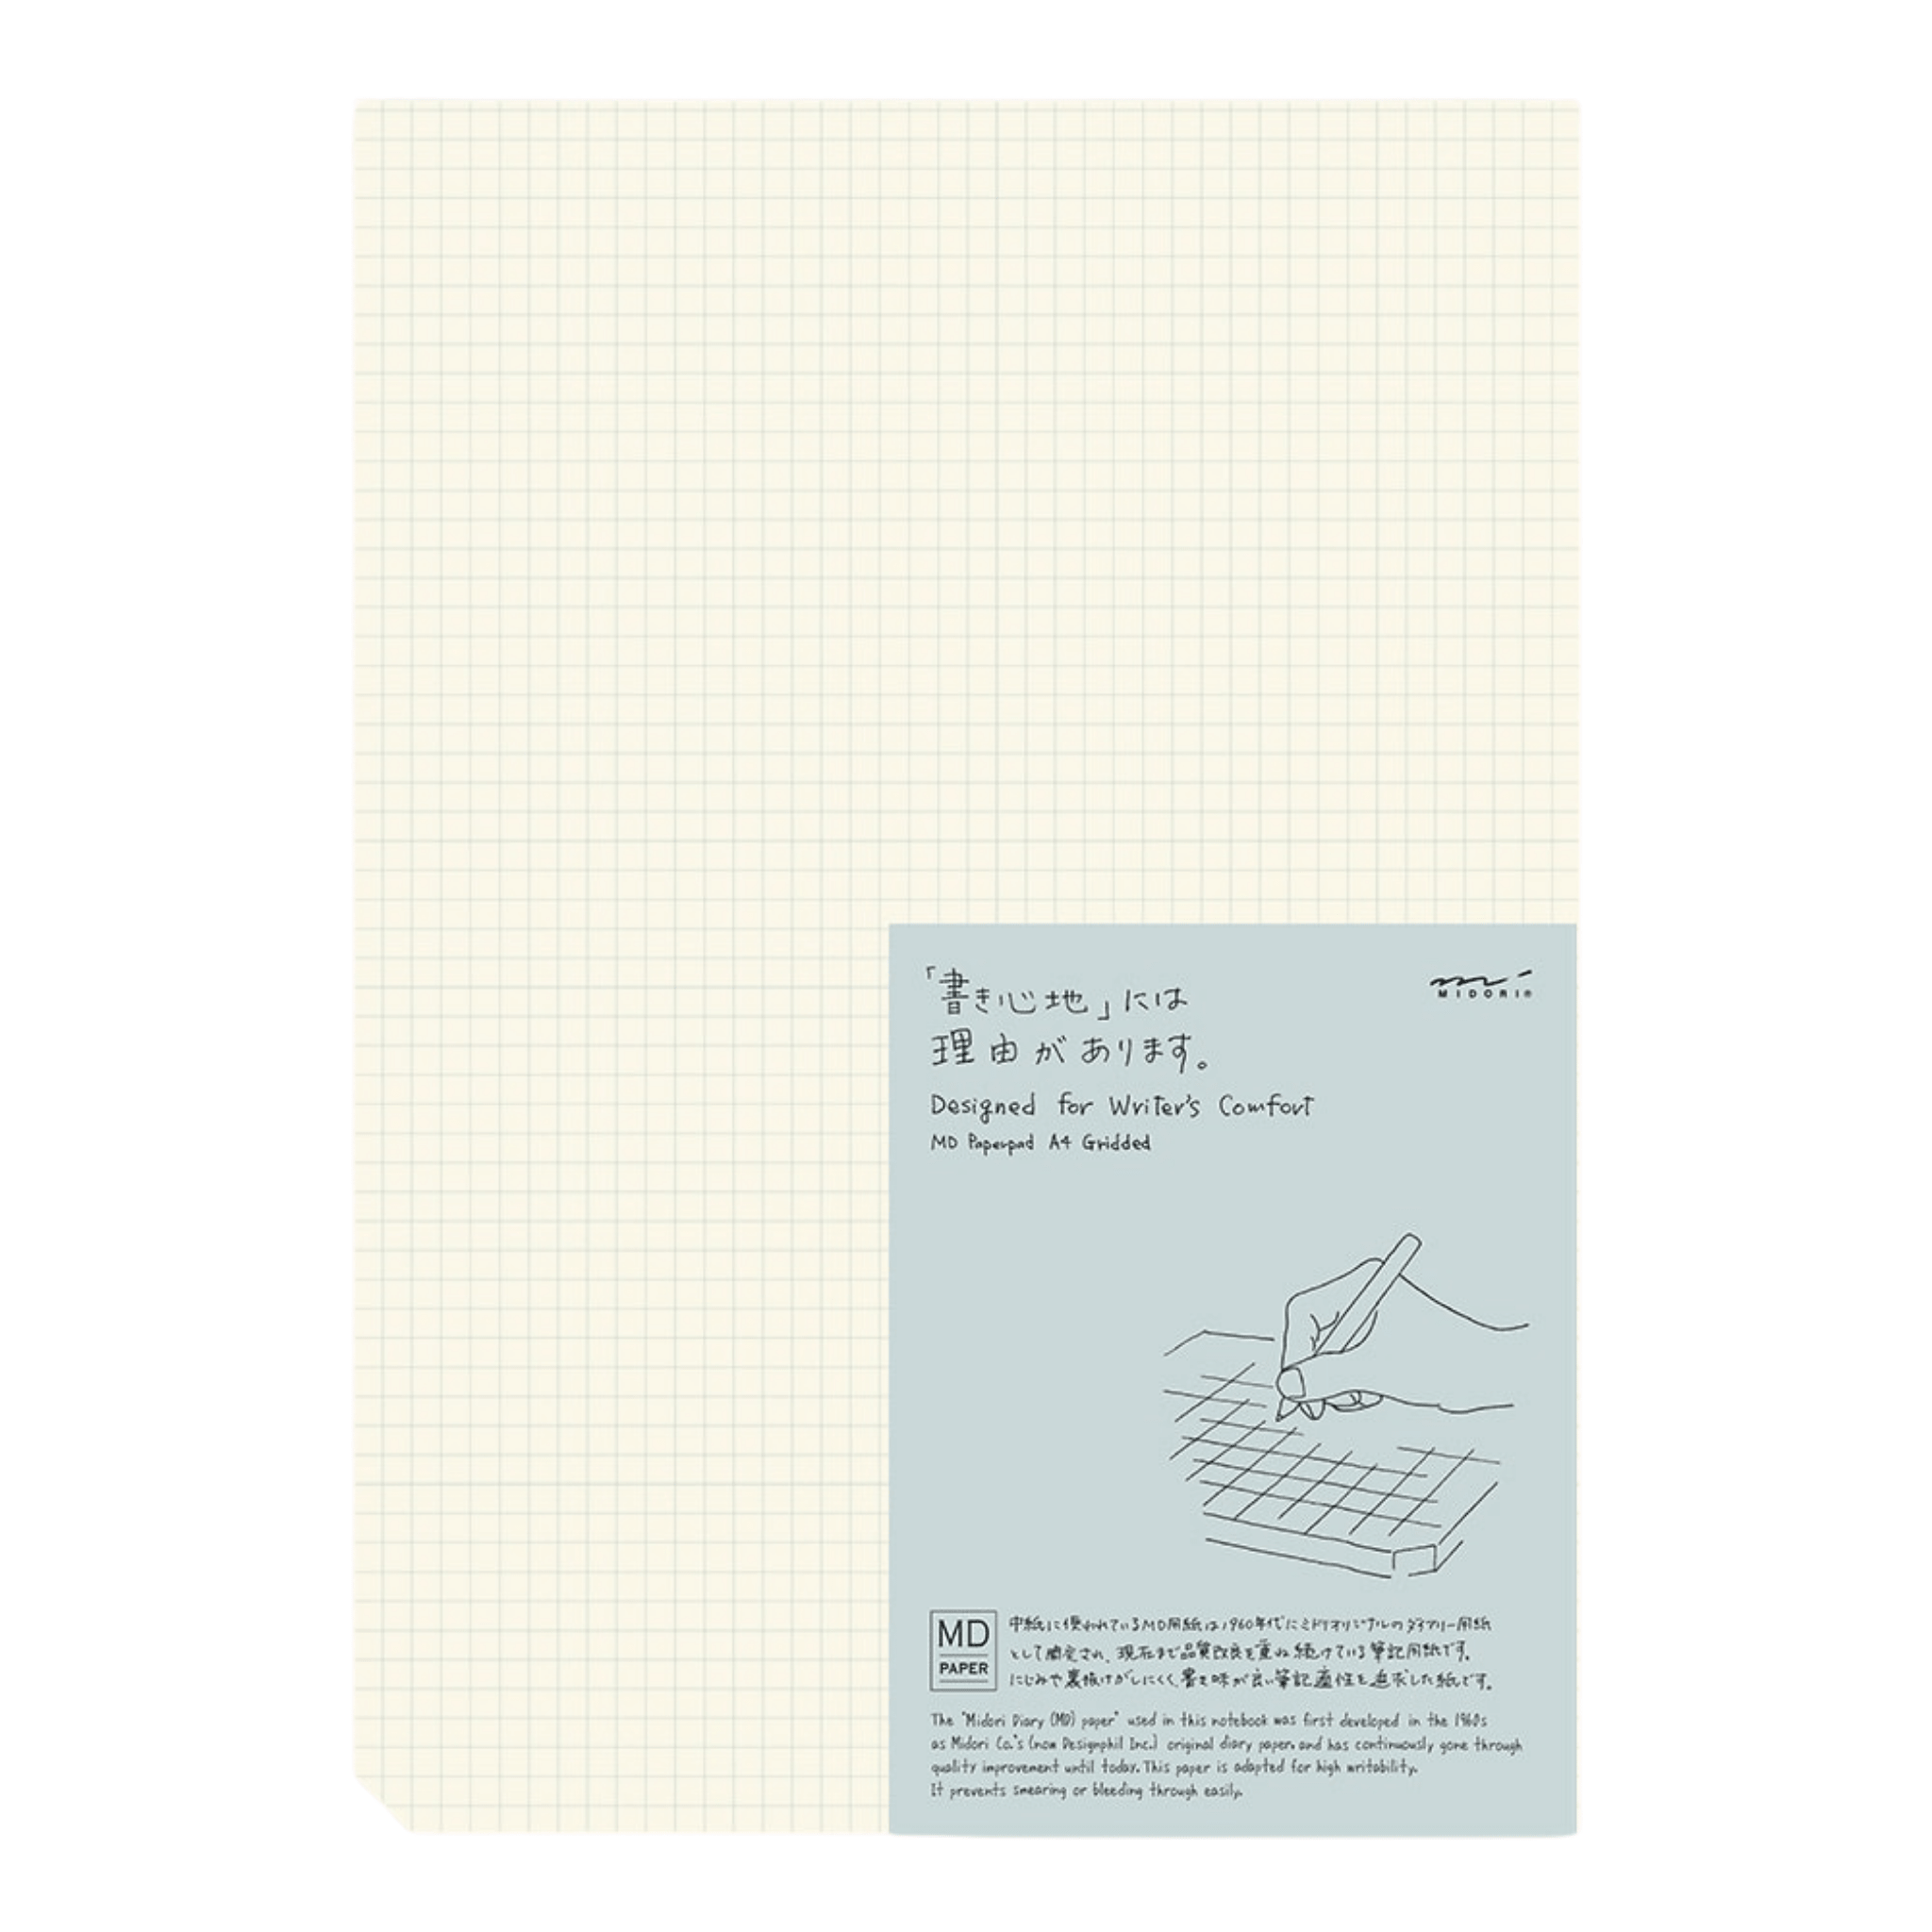 Midori MD A5 Lined Notebook